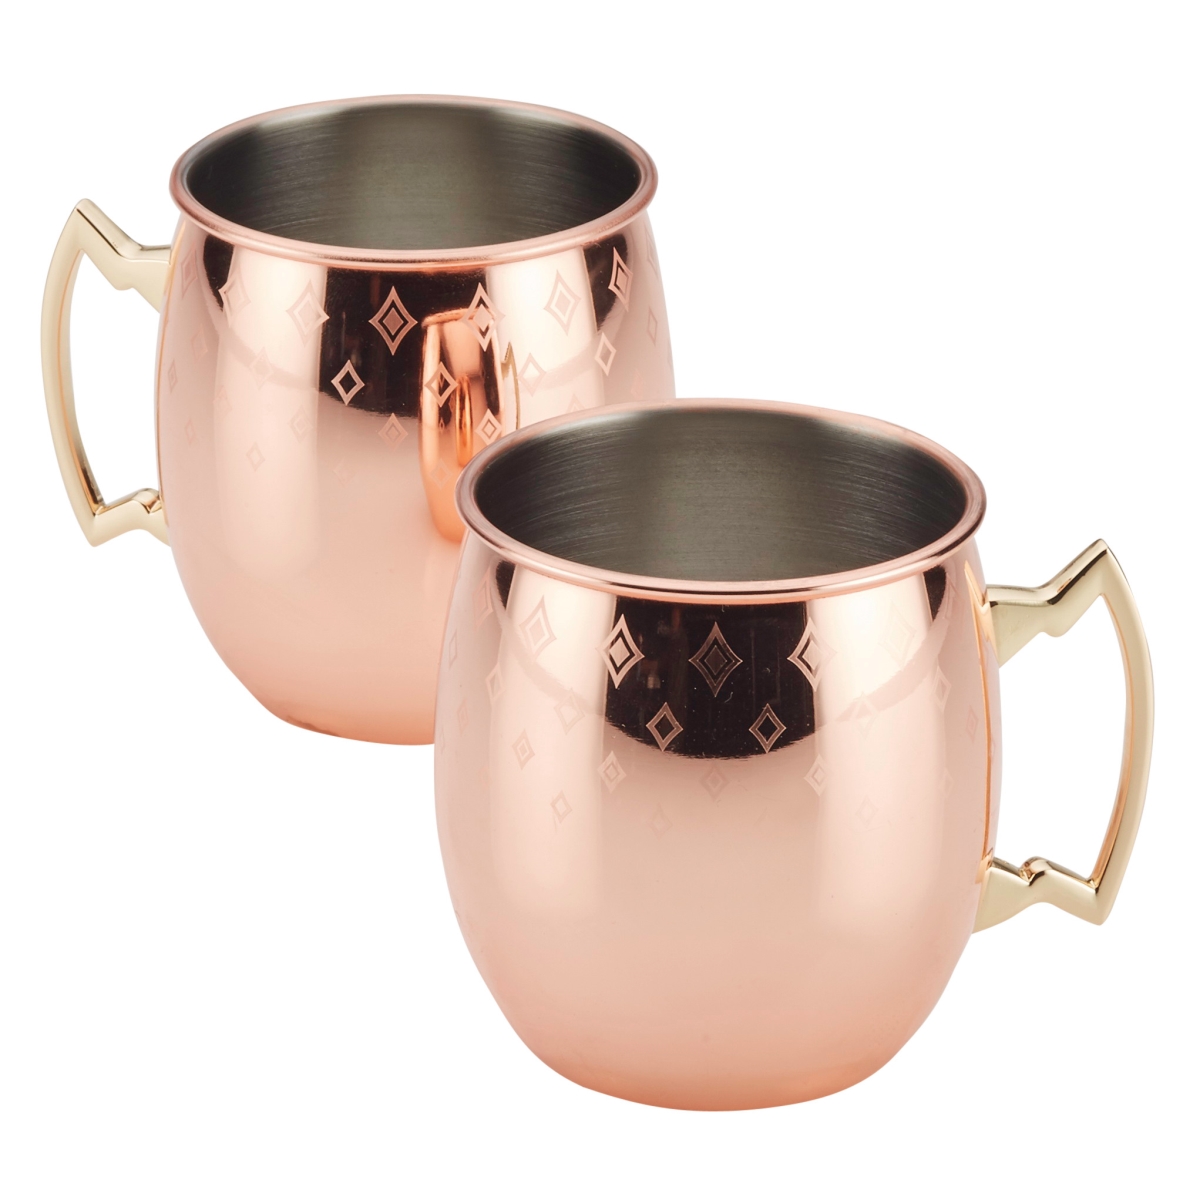 47514 Copper Moscow Mule Mugs With Etched Diamond Pattern, Set Of 2